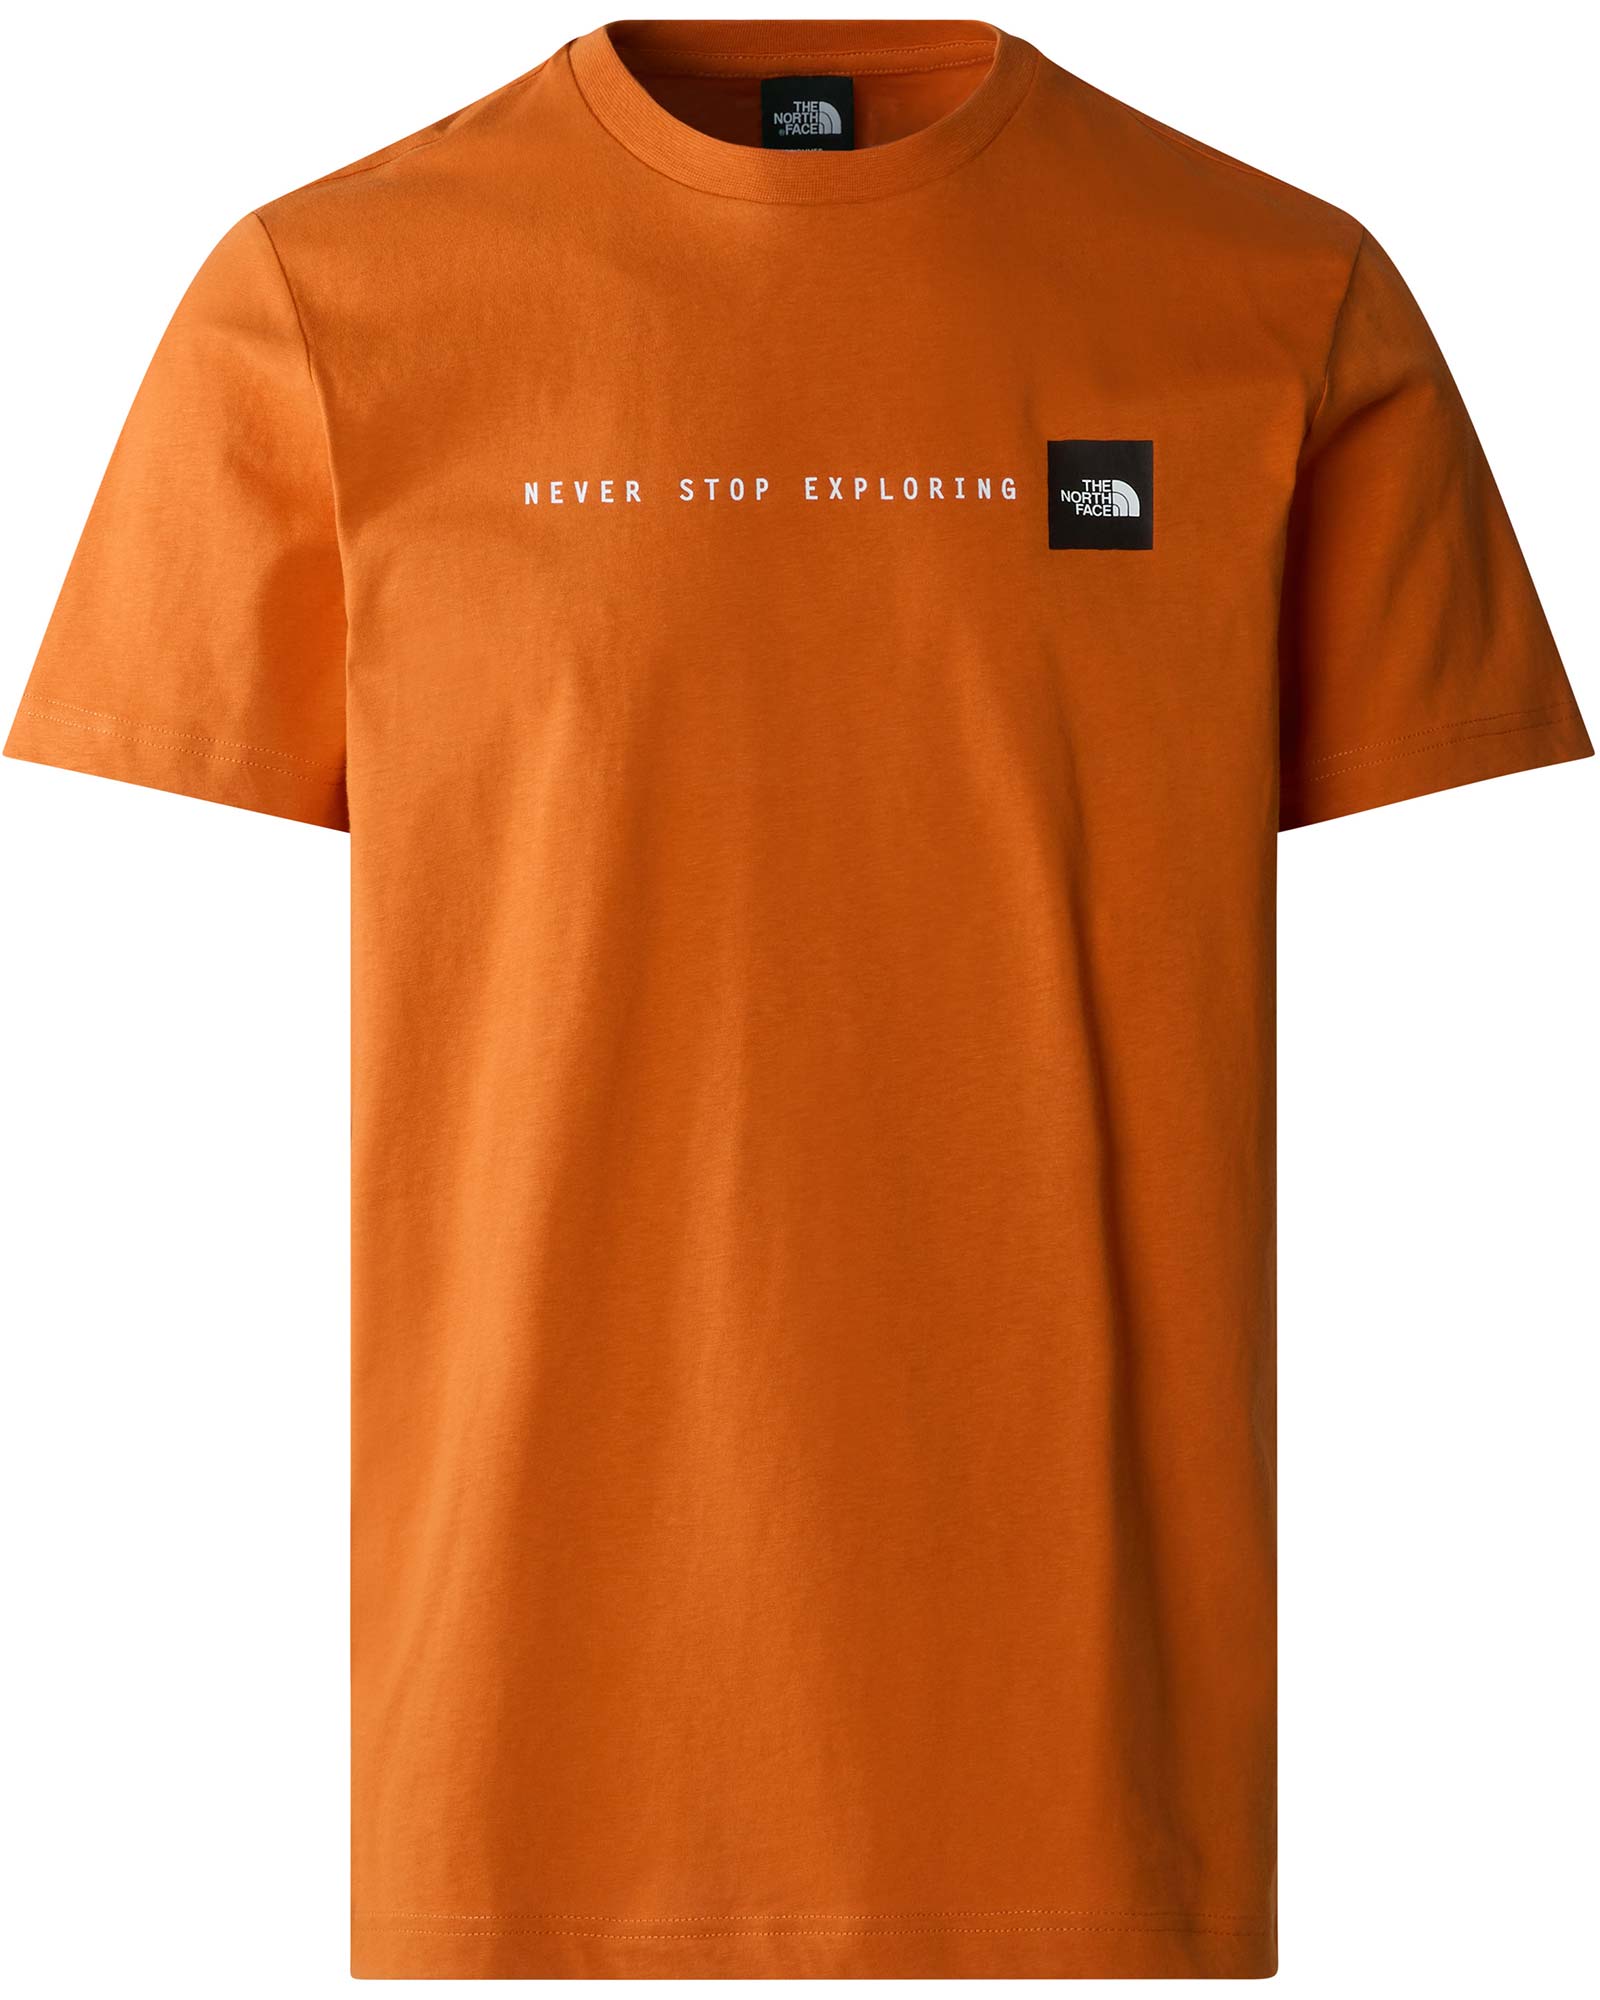 The North Face Men's Never Stop Exploring T-Shirt